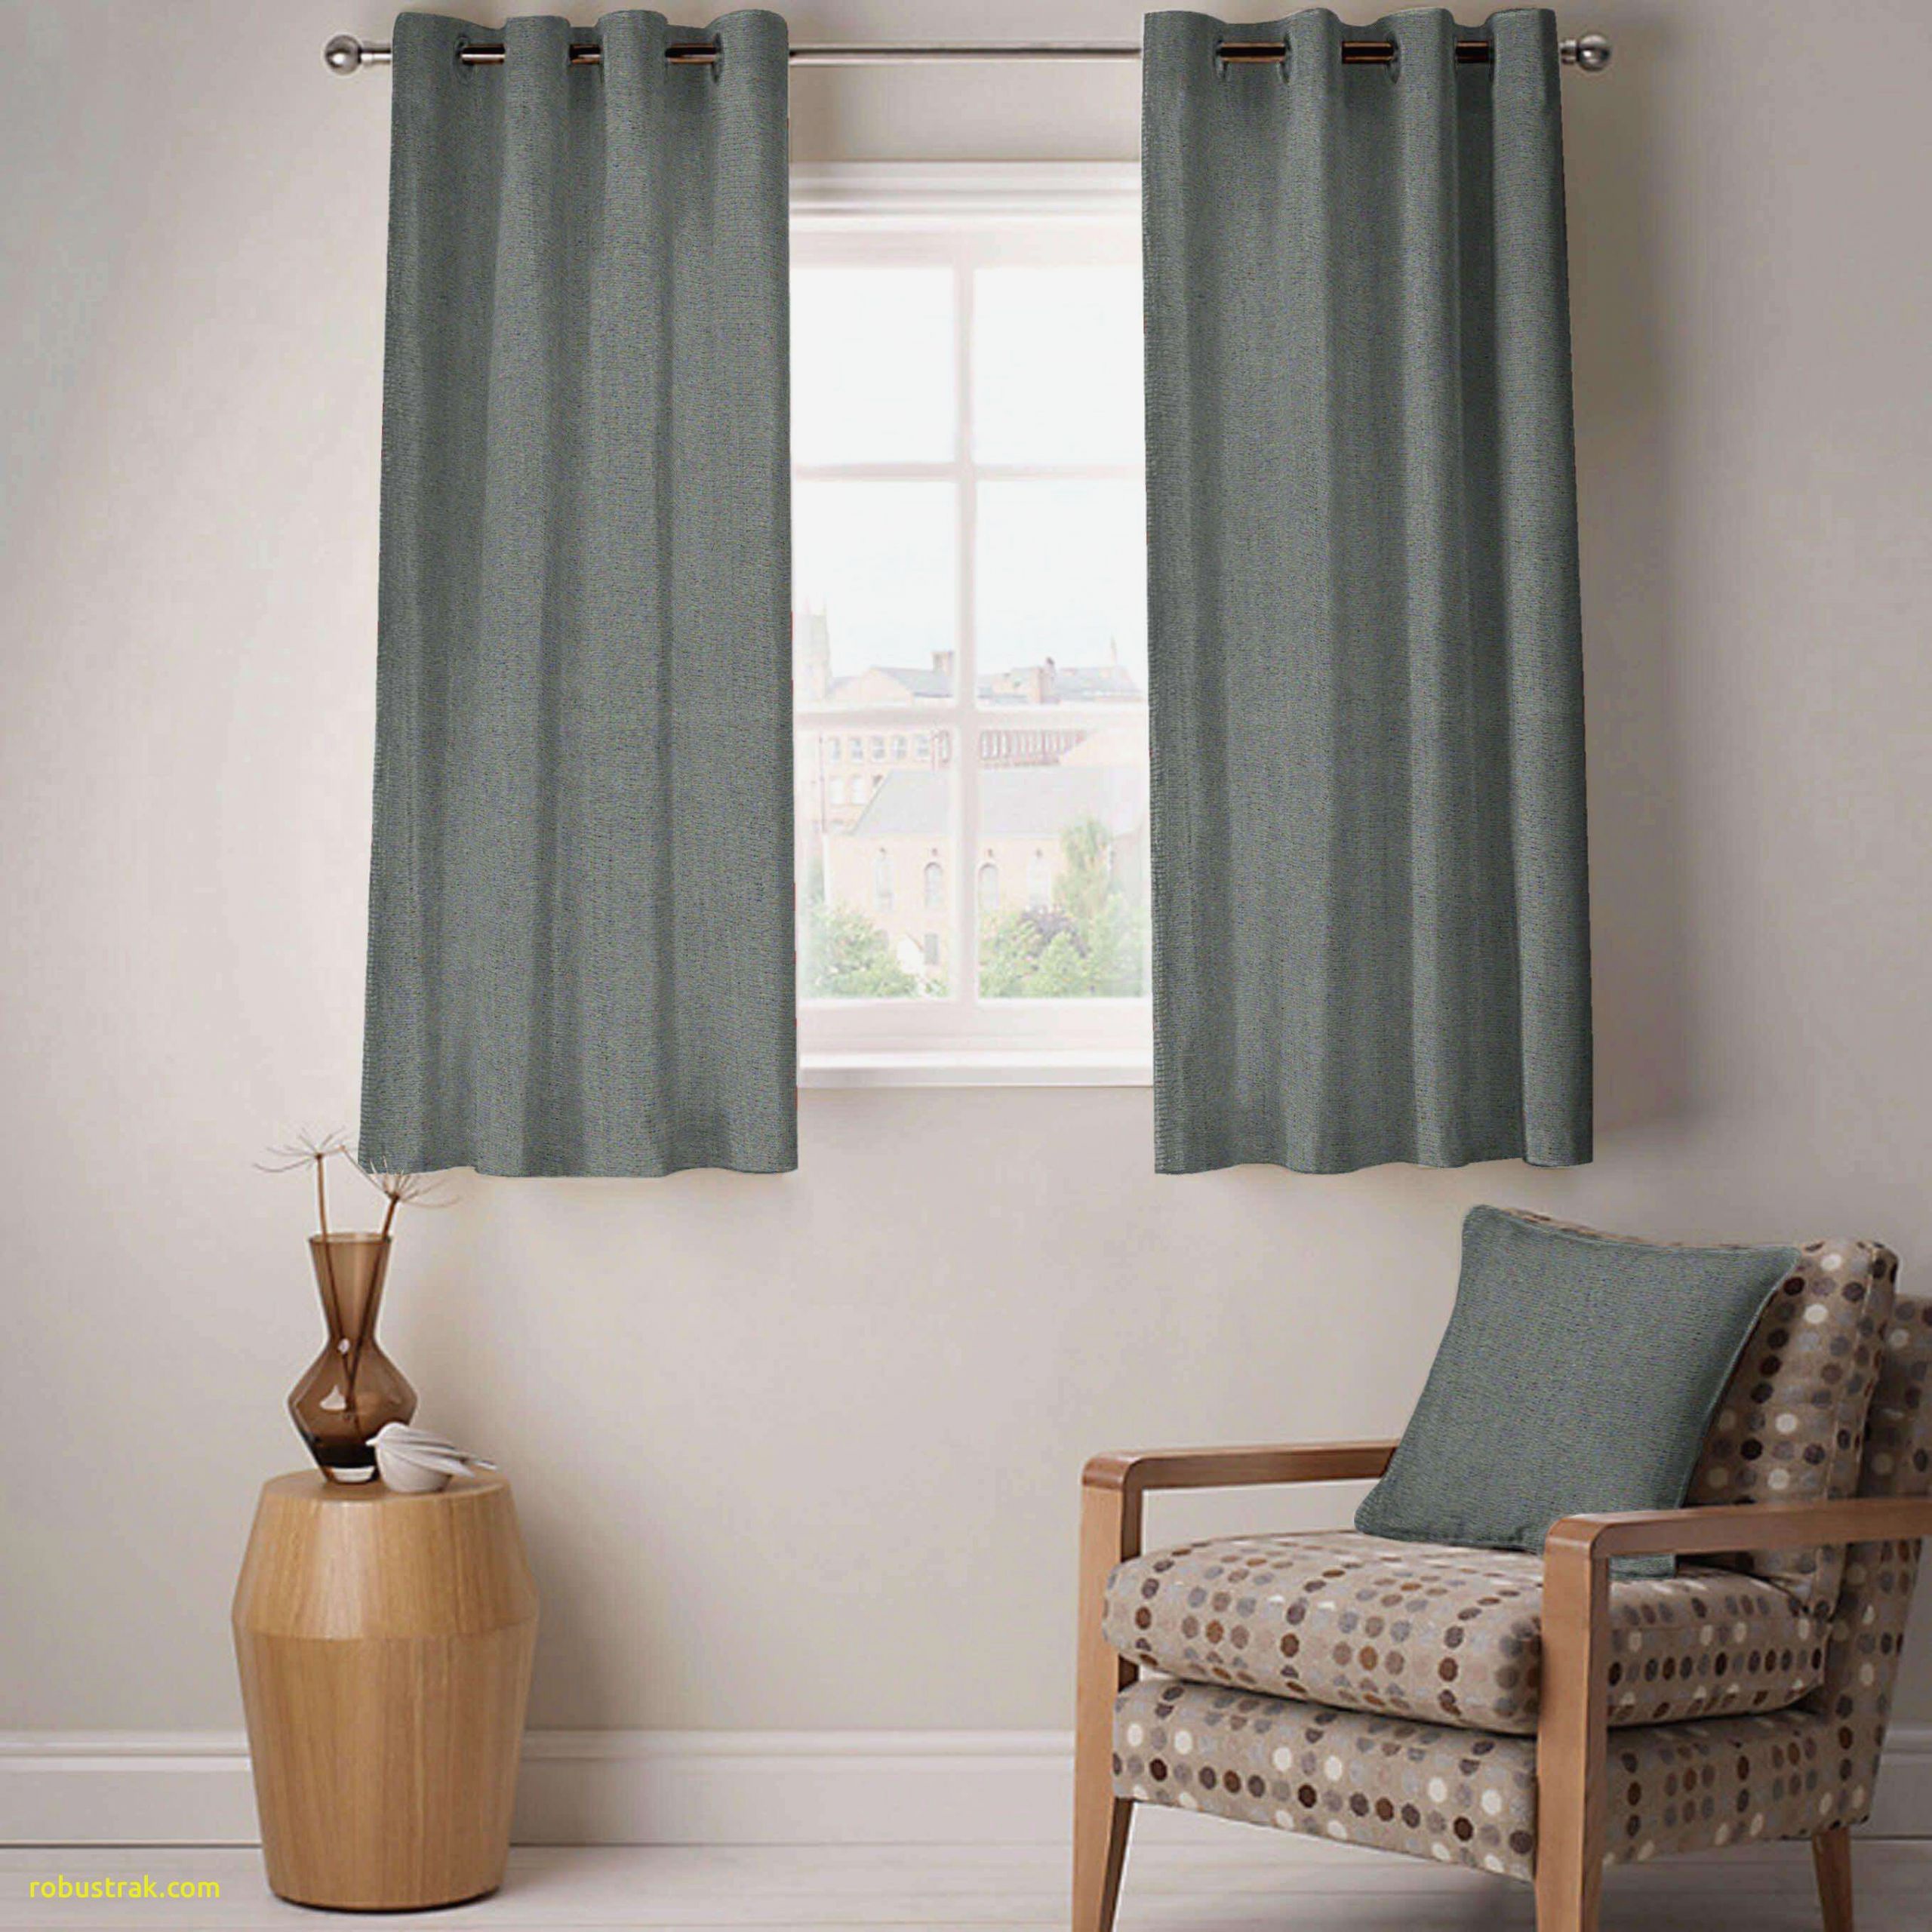 Kitchen Curtains At Jcpenney
 Kitchen Curtains At Jcpenney Bedroom Atmosphere Ideas Sale